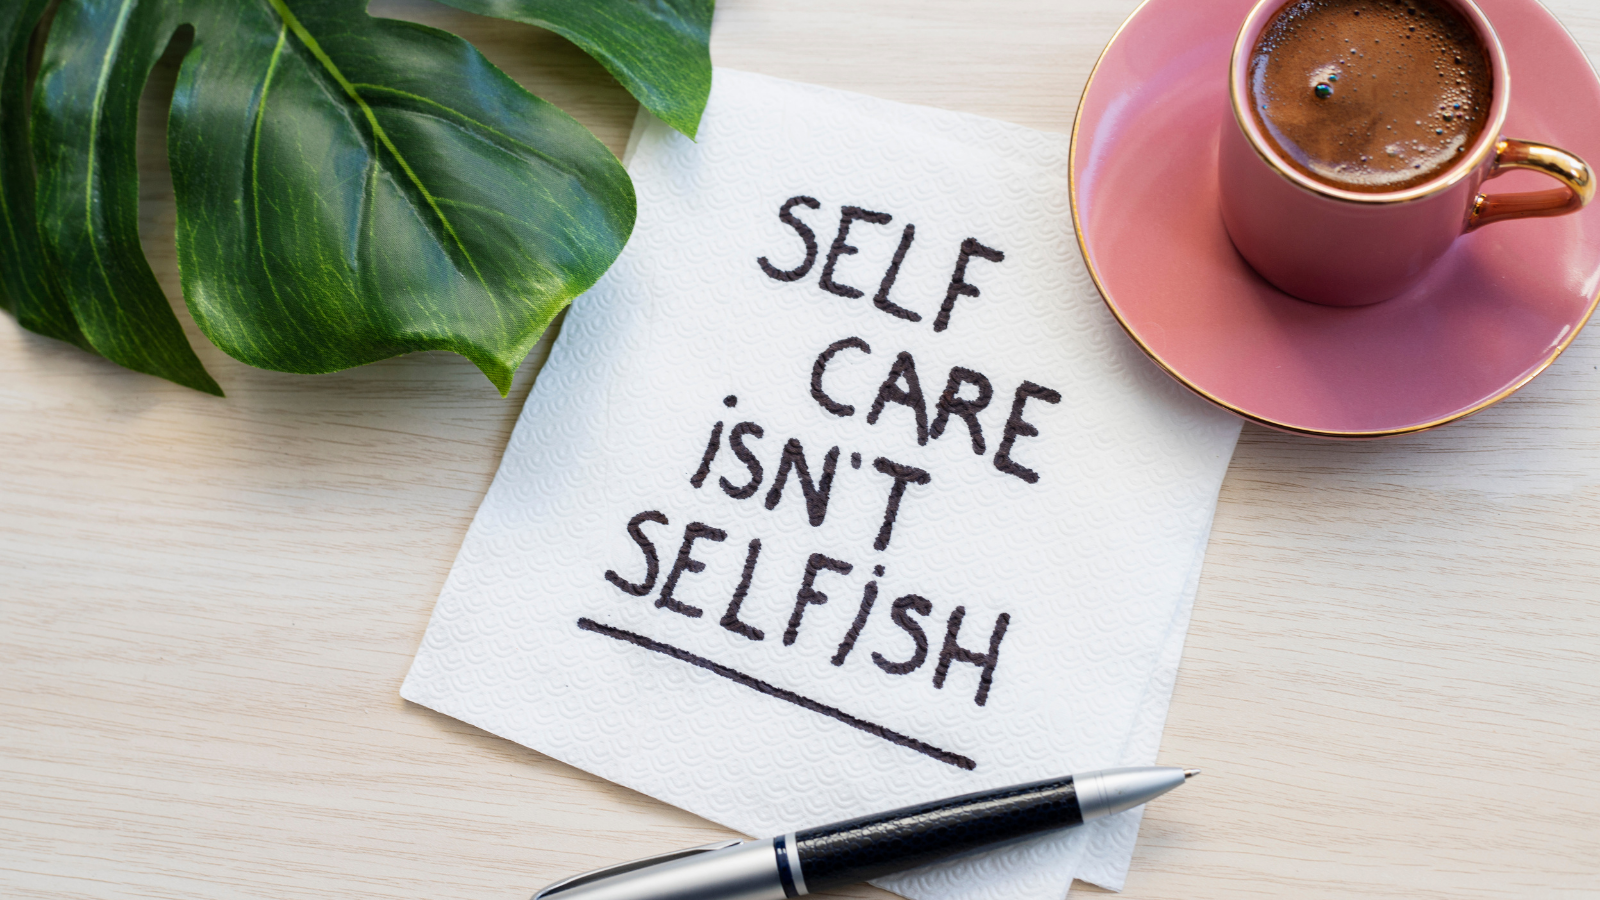 Top tips for looking after yourself as a carer